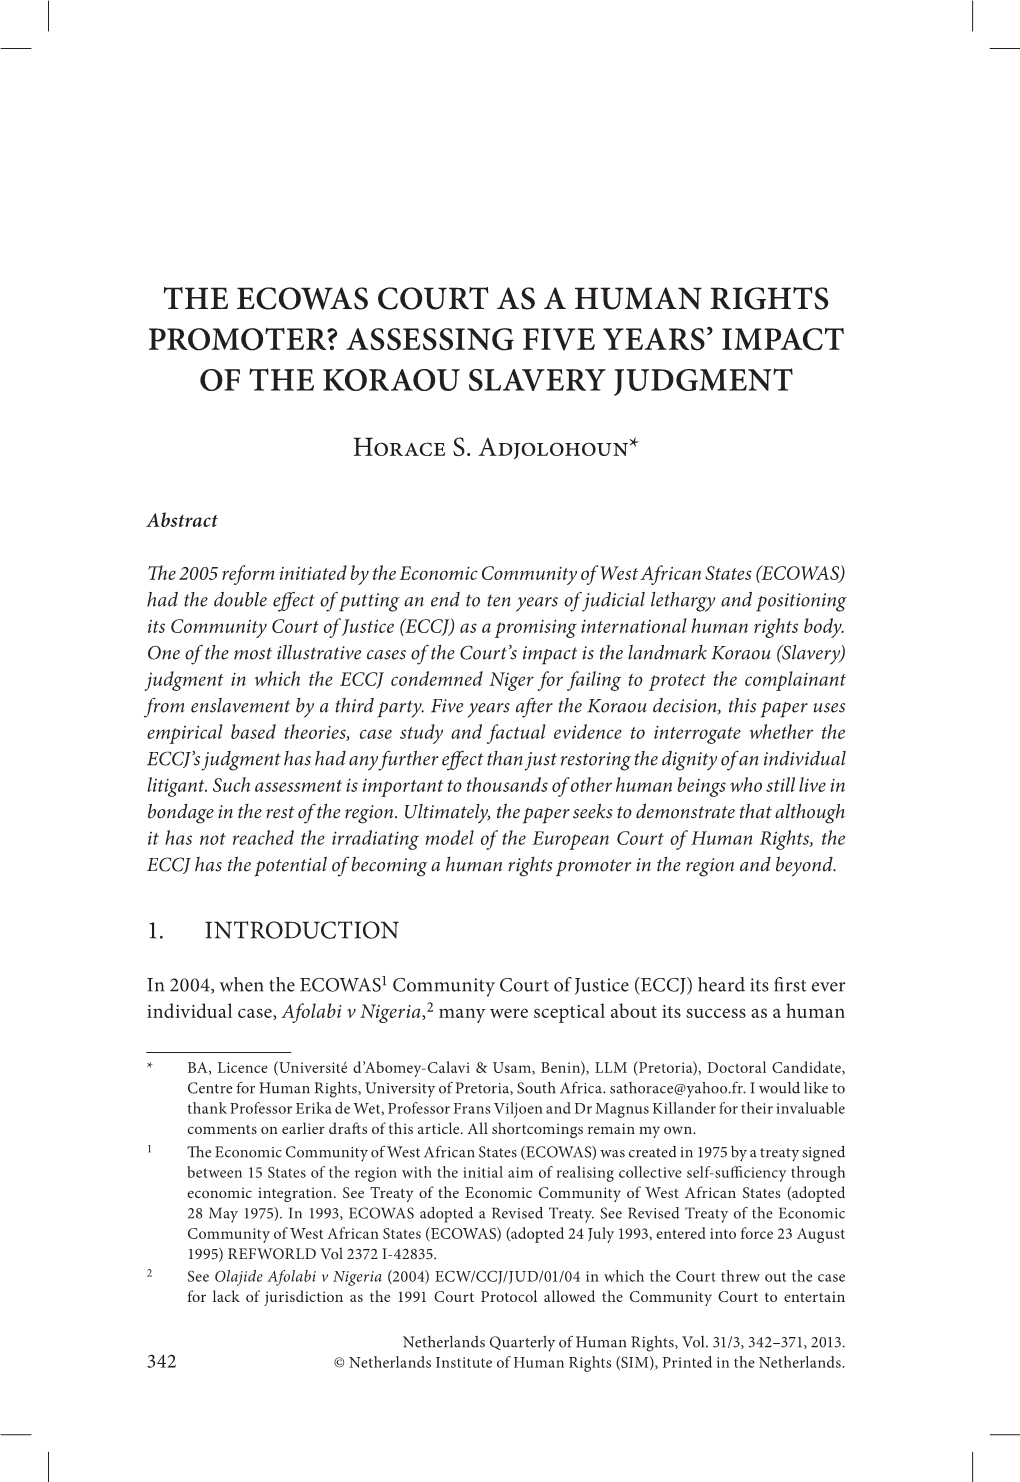 The Ecowas Court As a Human Rights Promoter? Assessing Five Years' Impact of the Koraou Slavery Judgment